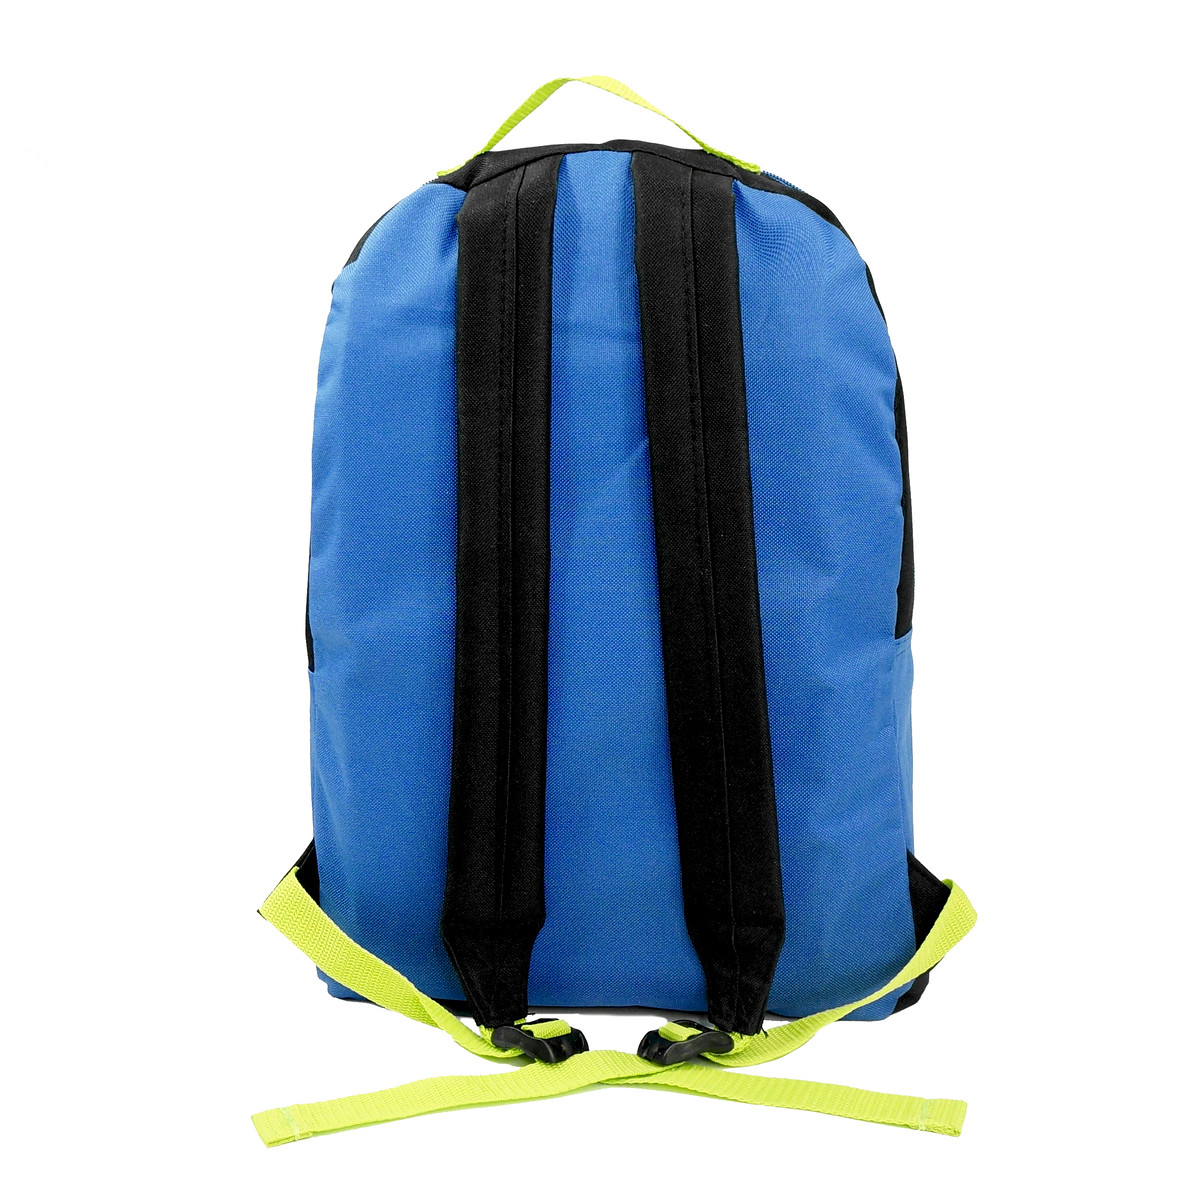 K-Cliffs 15" Lightweight Backpack, Daypack Bungee Water Resistant for Travel School and College, Unisex Color for Casual Everyday Kids & Teens (Blue) - image 5 of 6